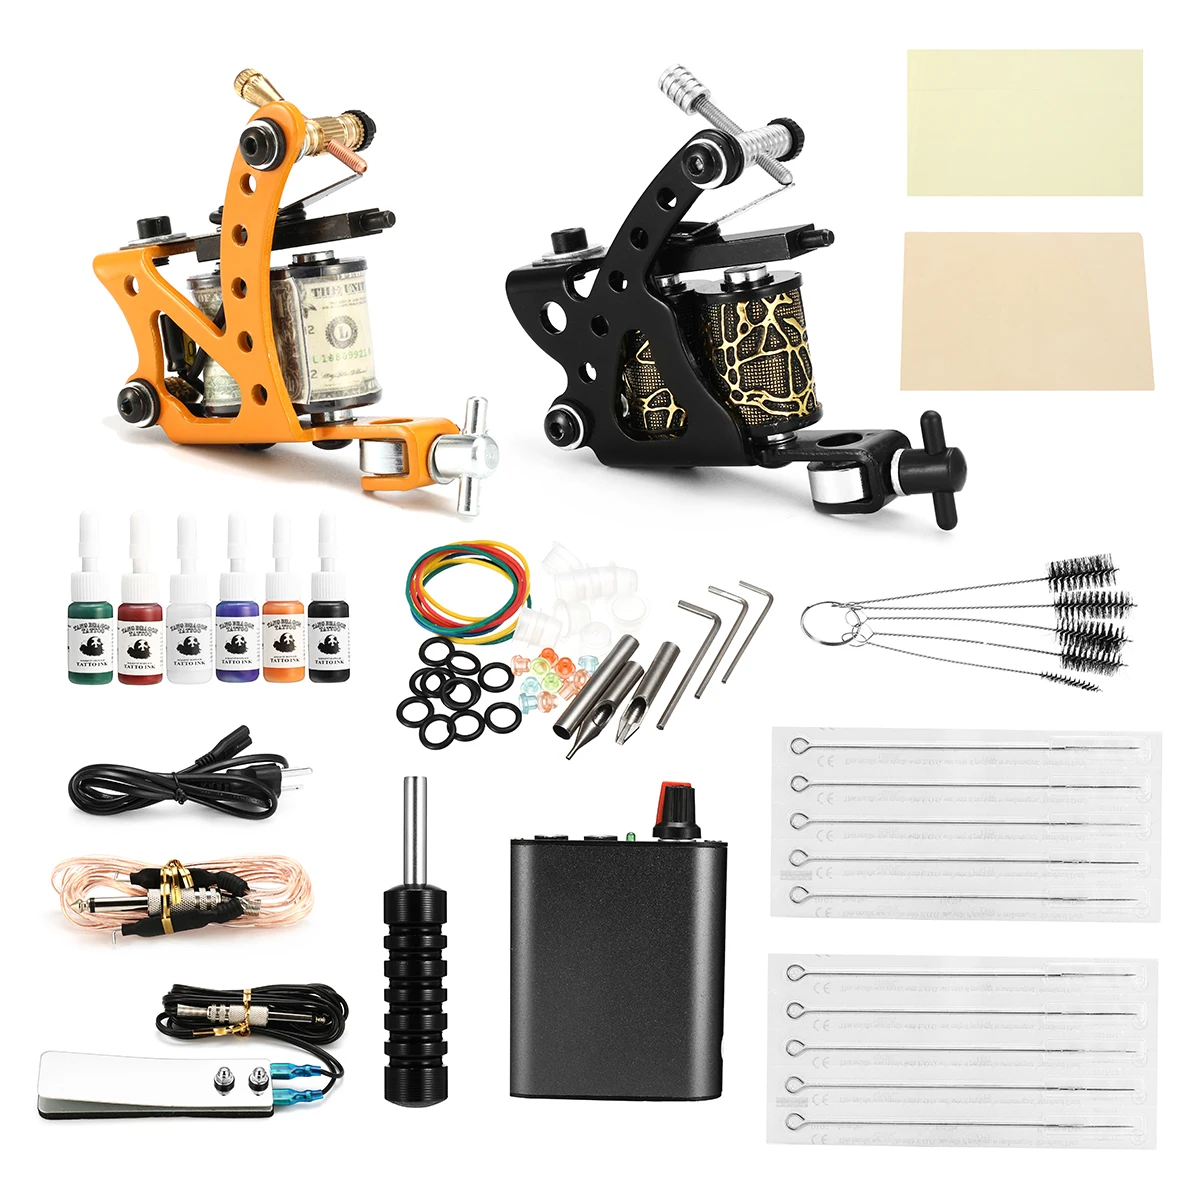 Beginner Complete Tattoo Kits 2 Tattoo Coils/Guns Machine 6 Colors Ink Sets Power Supply Needle Pedal Tips Permanent Makeup Art